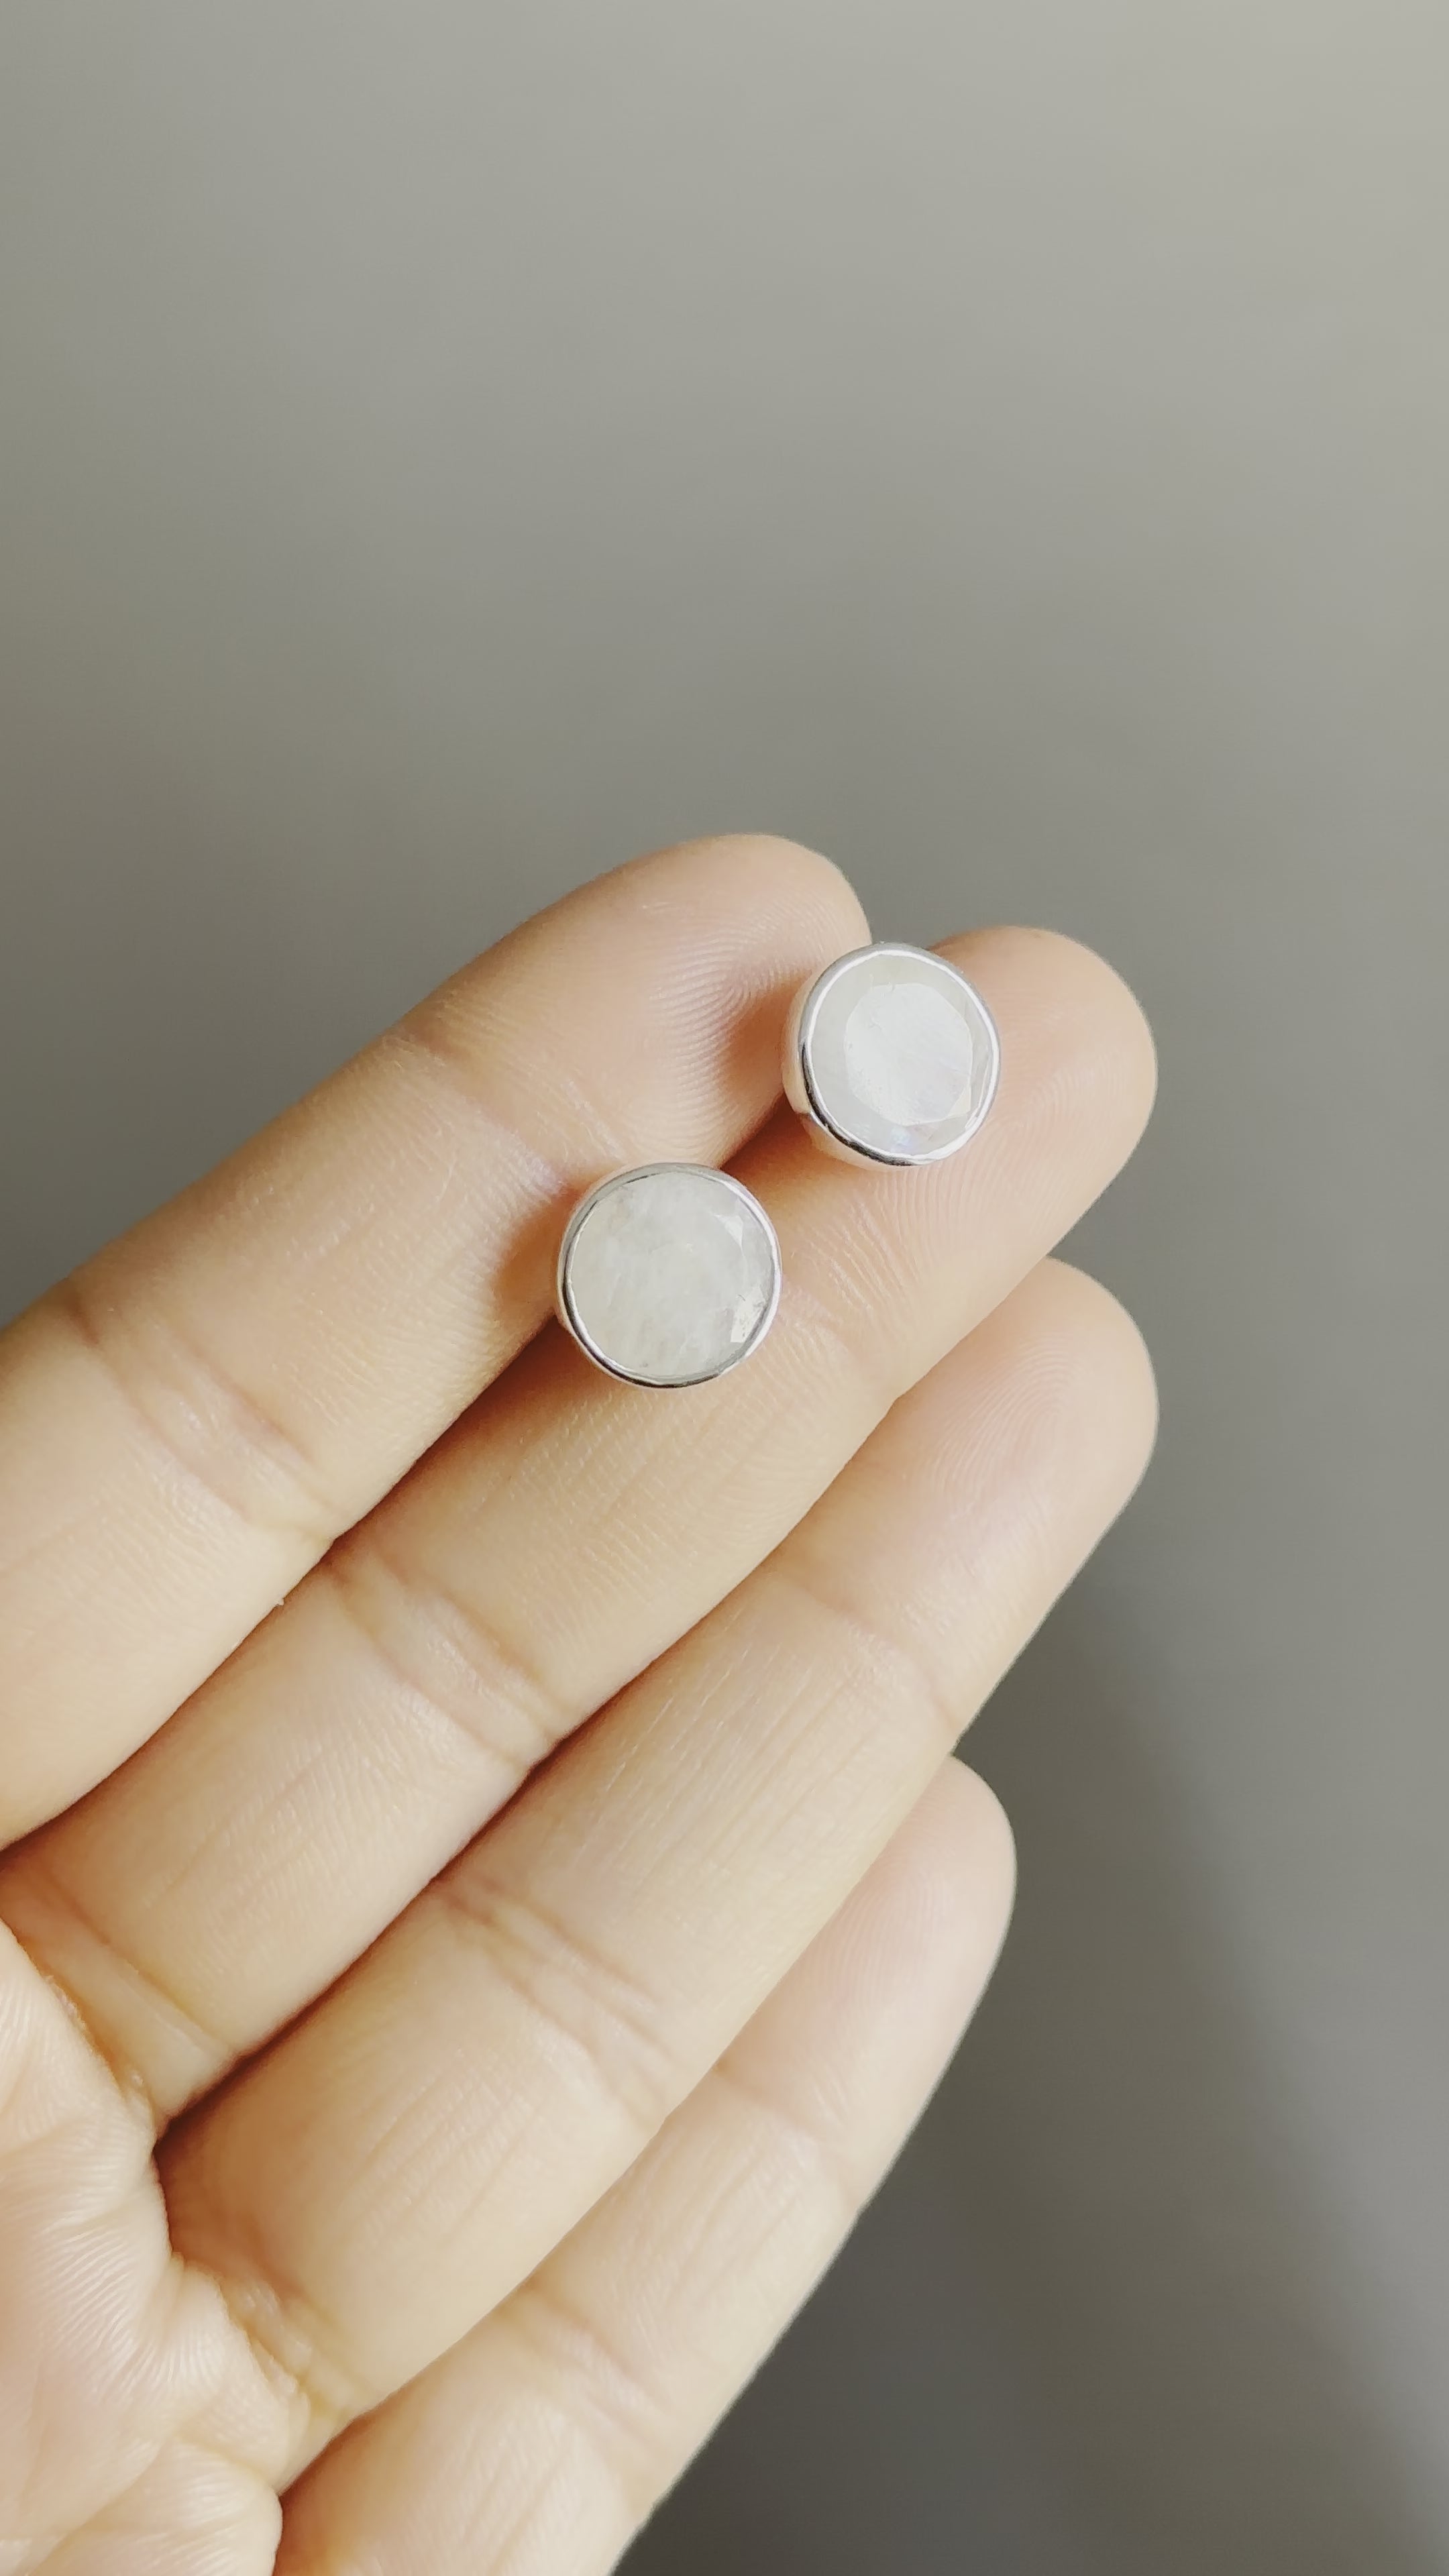 Moonstone Studs in Sterling Silver with a Round Faceted Gemstone